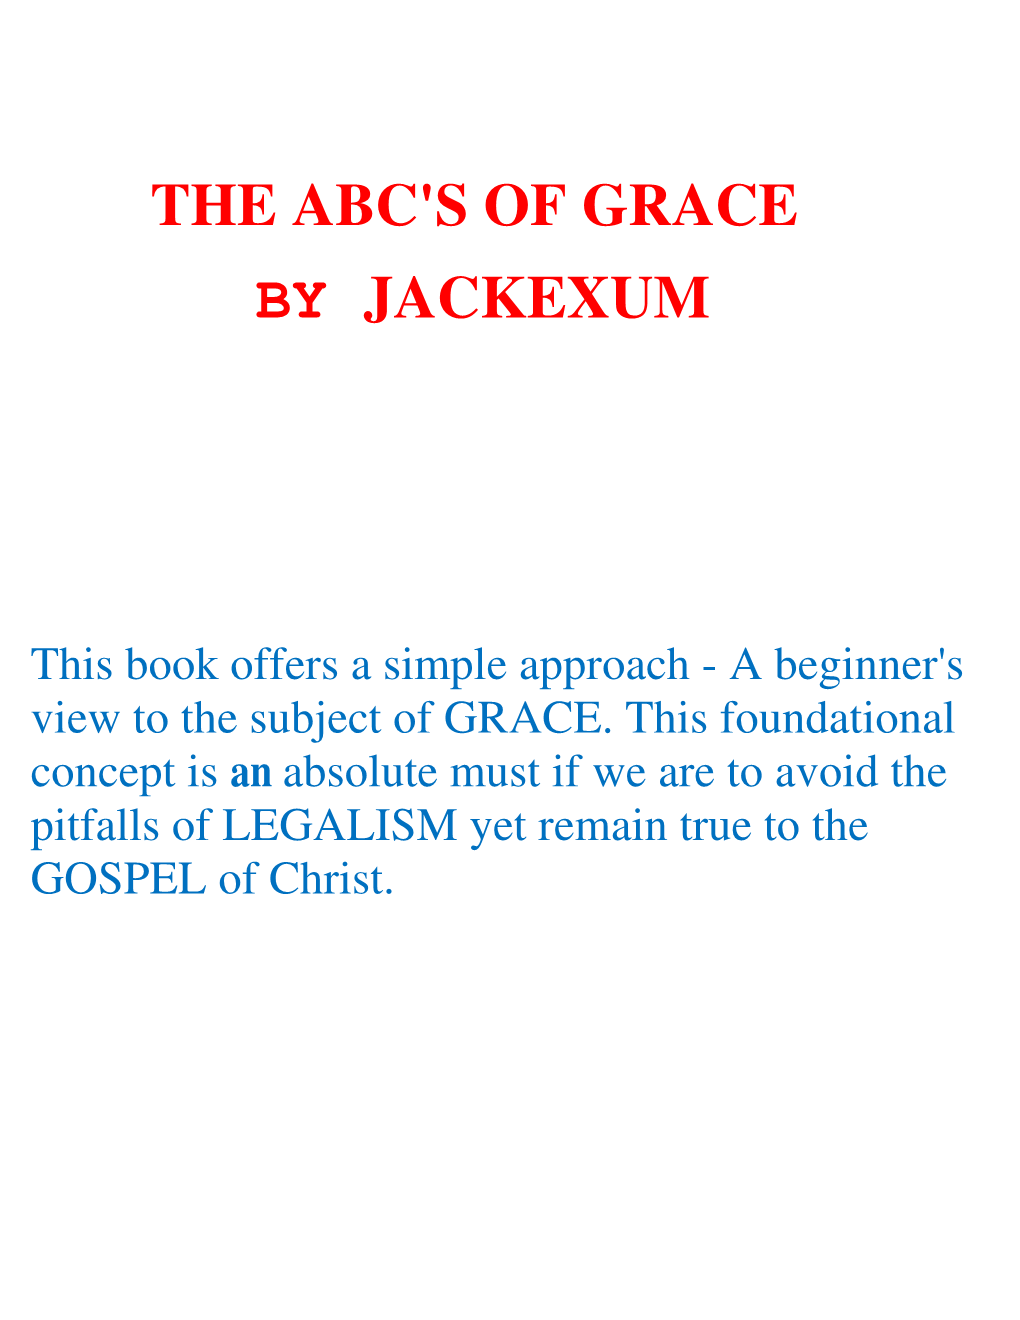 The Abc's of Grace by Jackexum